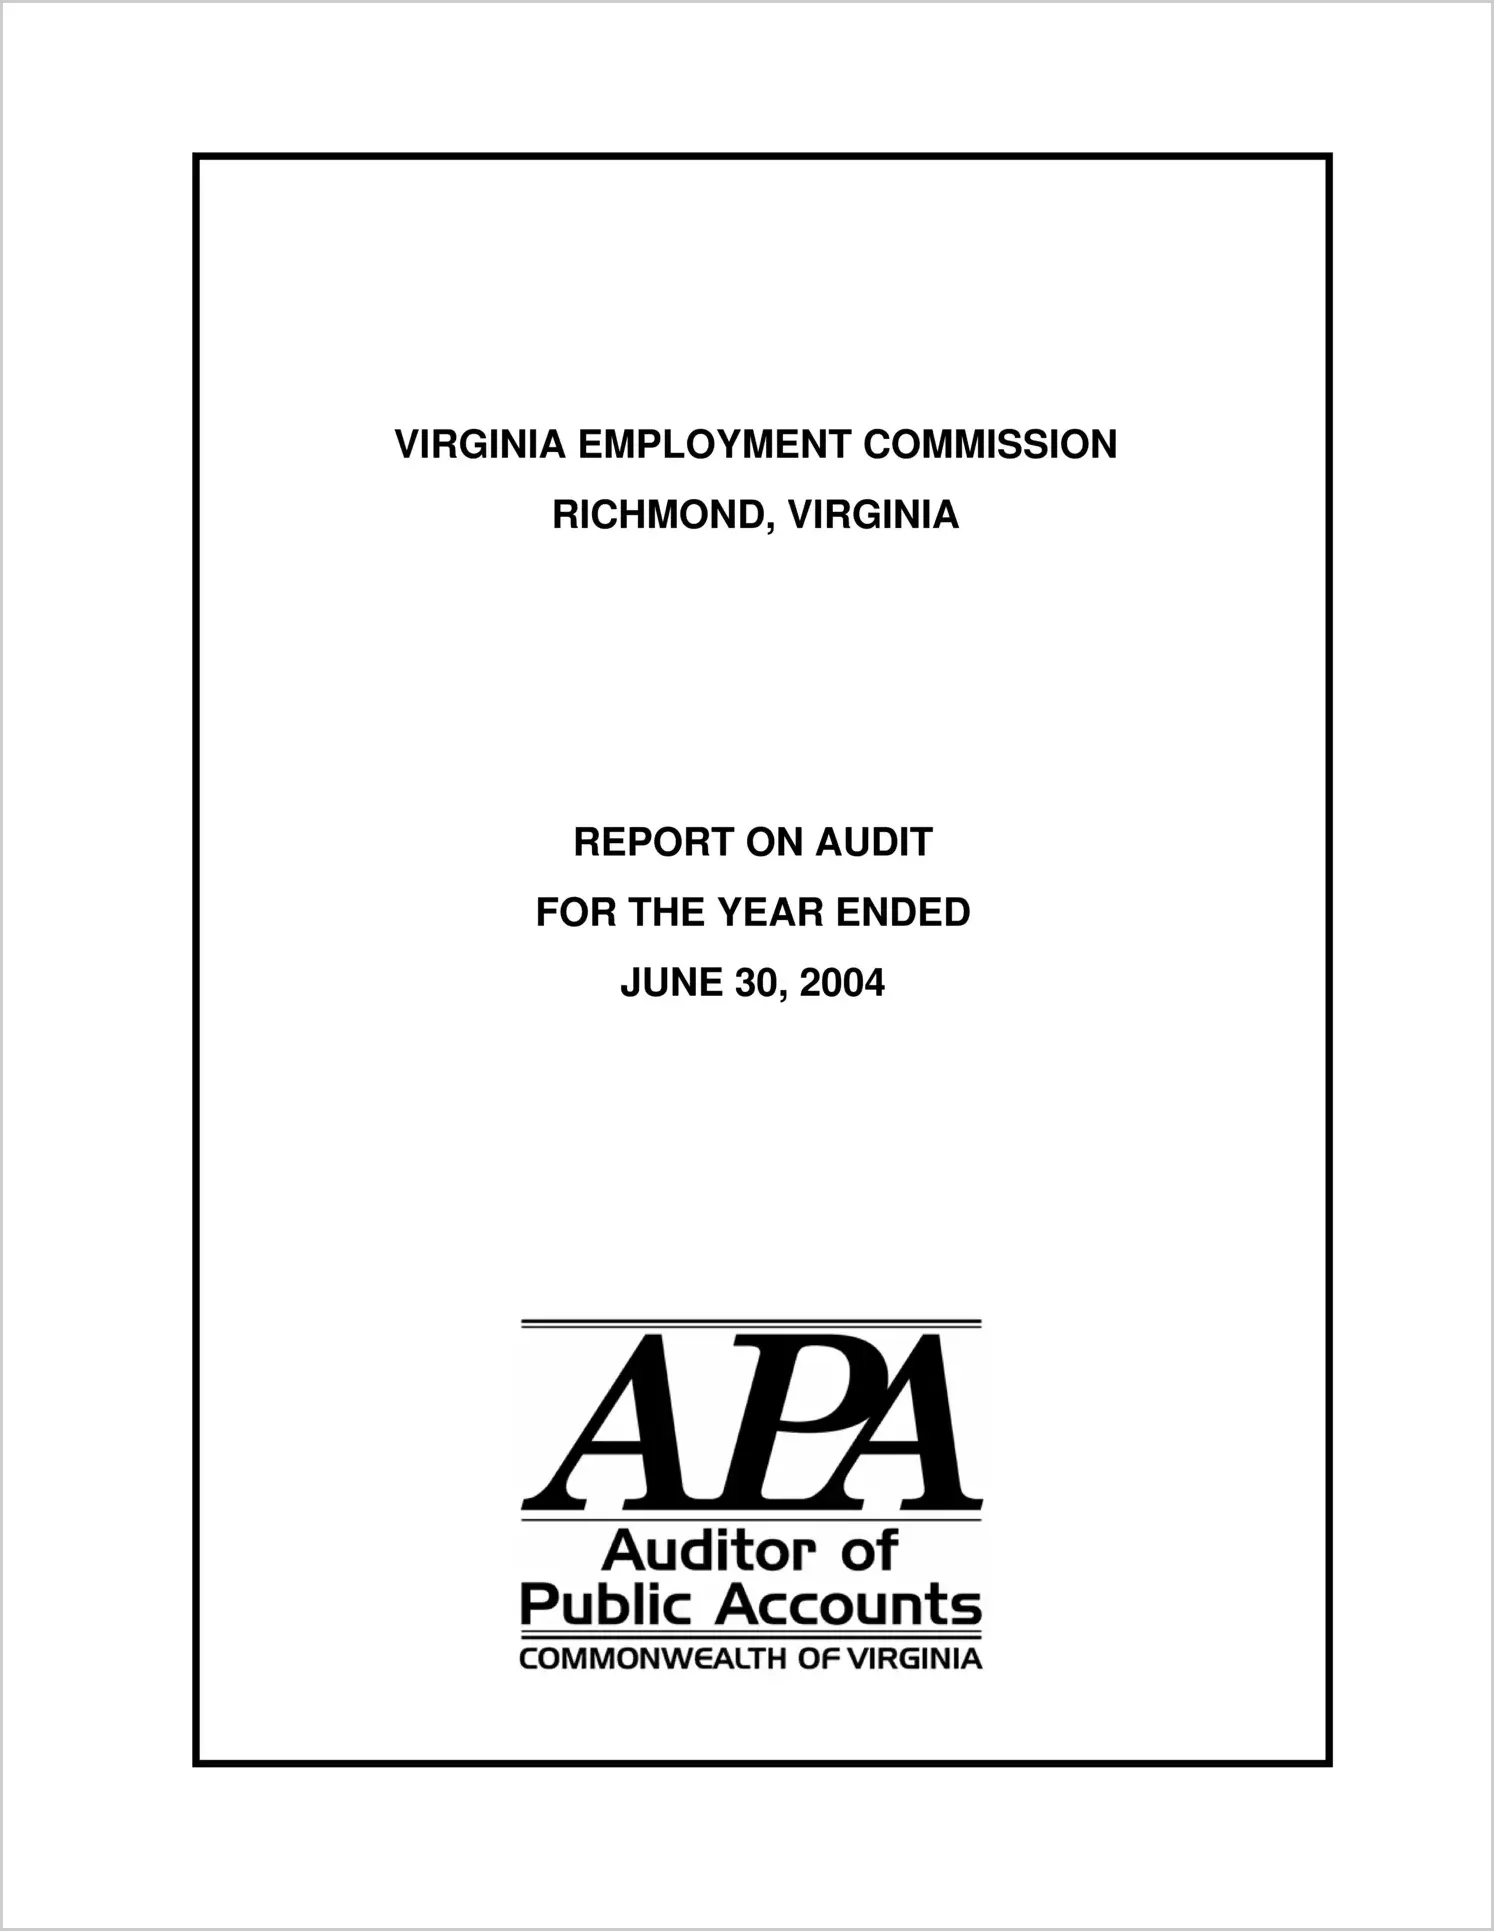 Virginia Employment Commission for the year ended June 30, 2004